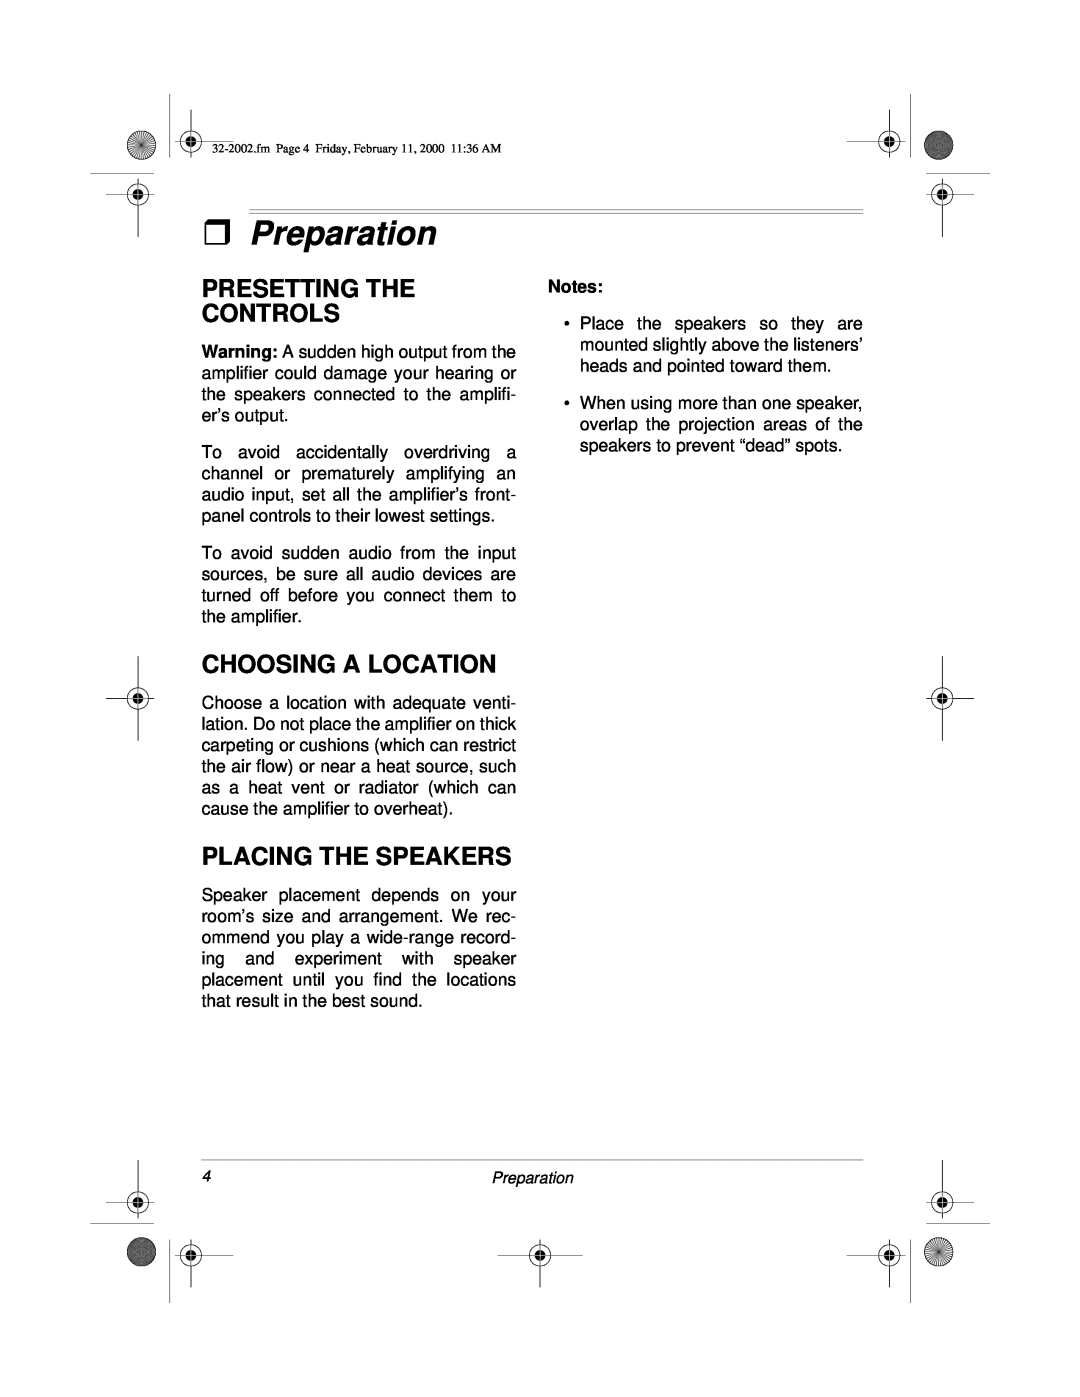 Radio Shack MPA-50 owner manual ˆPreparation, Presetting The Controls, Choosing A Location, Placing The Speakers 